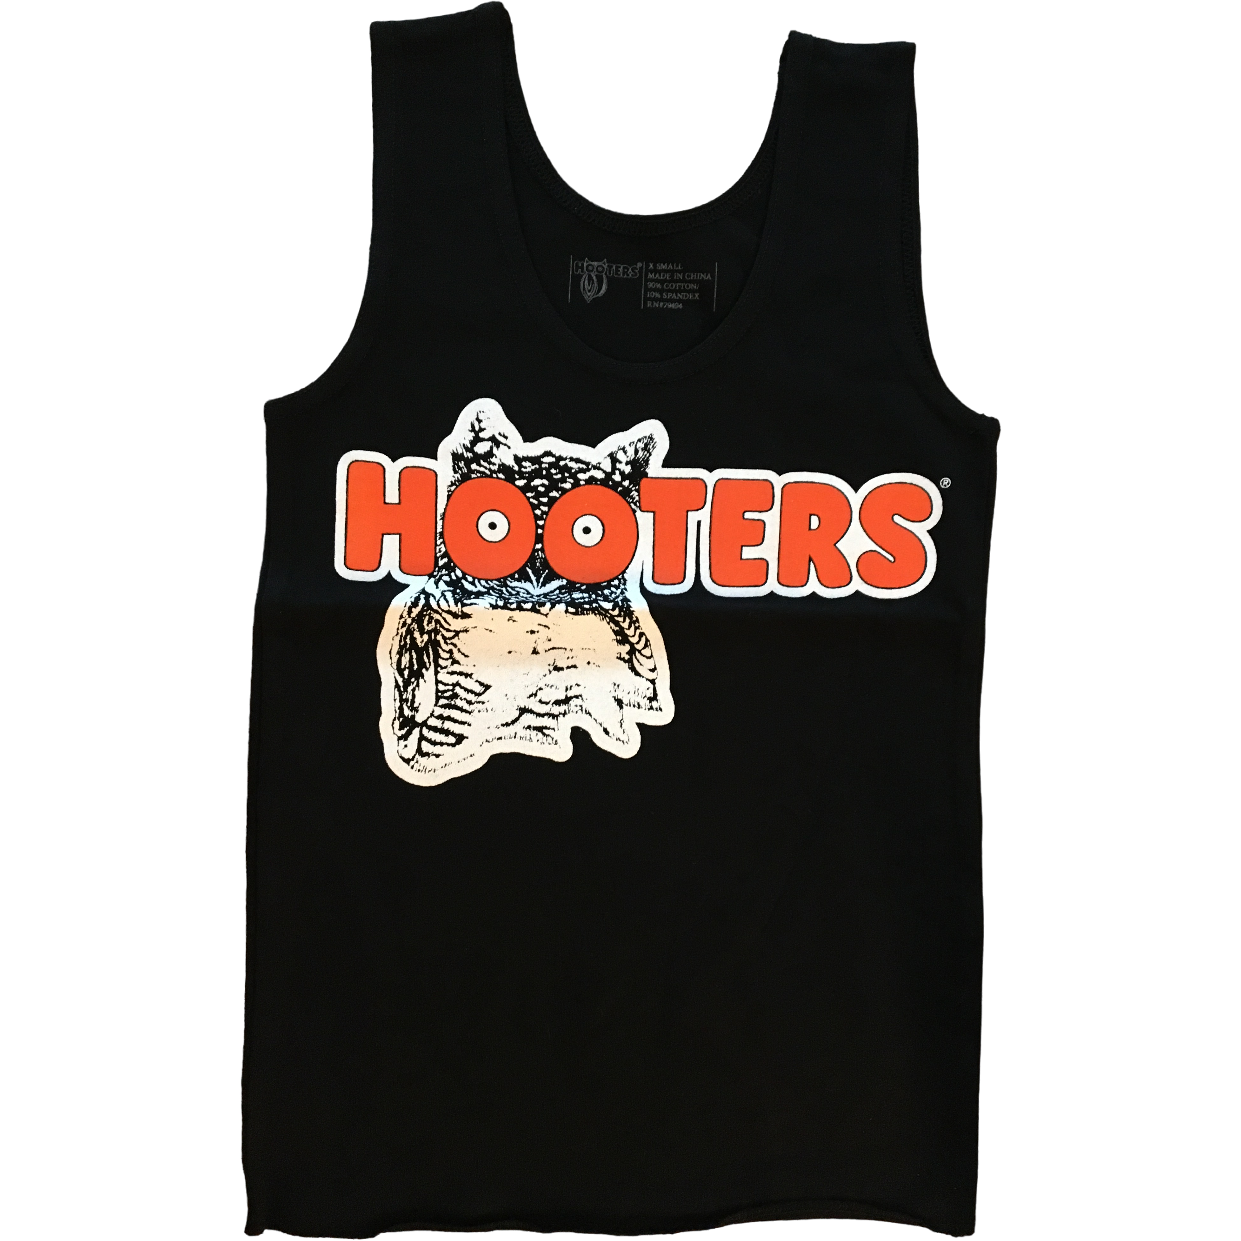 Hooters Women's Outfit Costume Spandex Black Tank Top